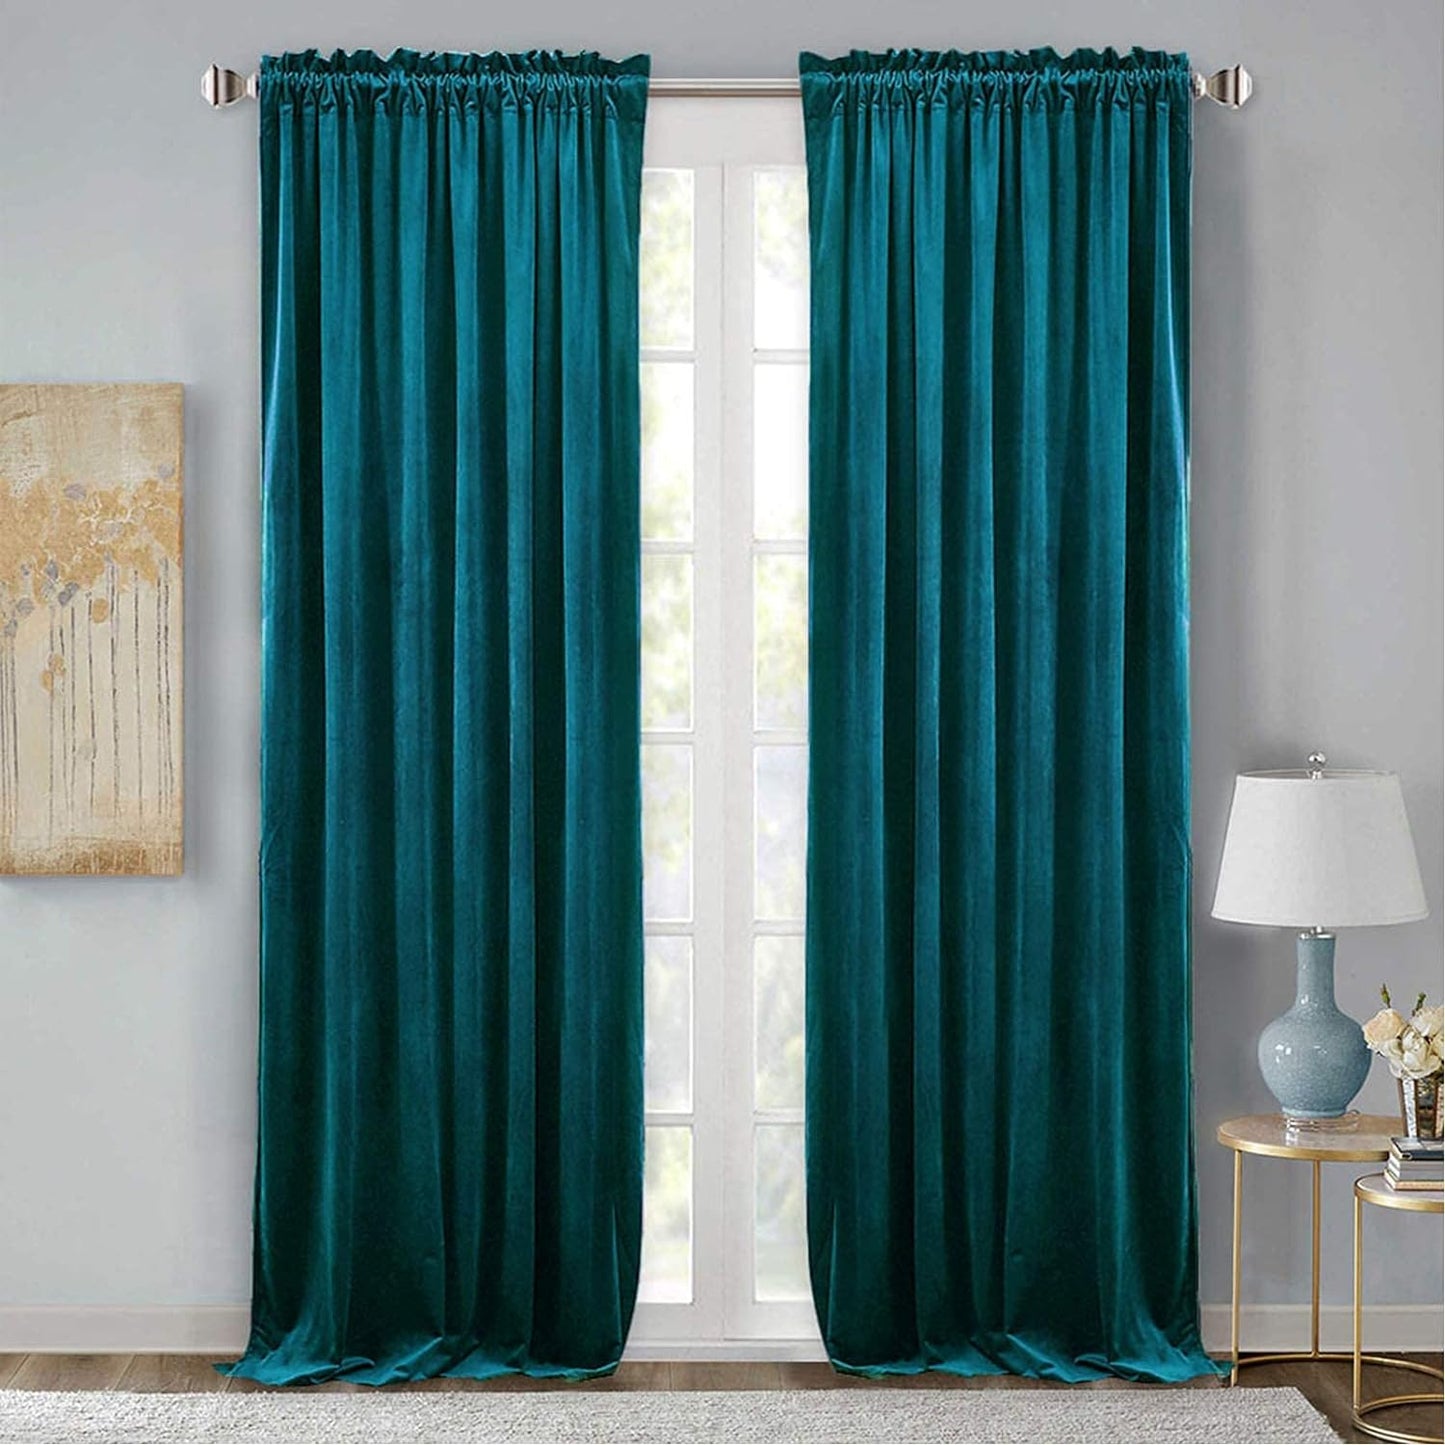 Stangh Theater Red Velvet Curtains - Super Soft Velvet Blackout Insulated Curtain Panels 84 Inches Length for Living Room Holiday Decorative Drapes for Master Bedroom, W52 X L84, 2 Panels  StangH Teal W52" X L96" 